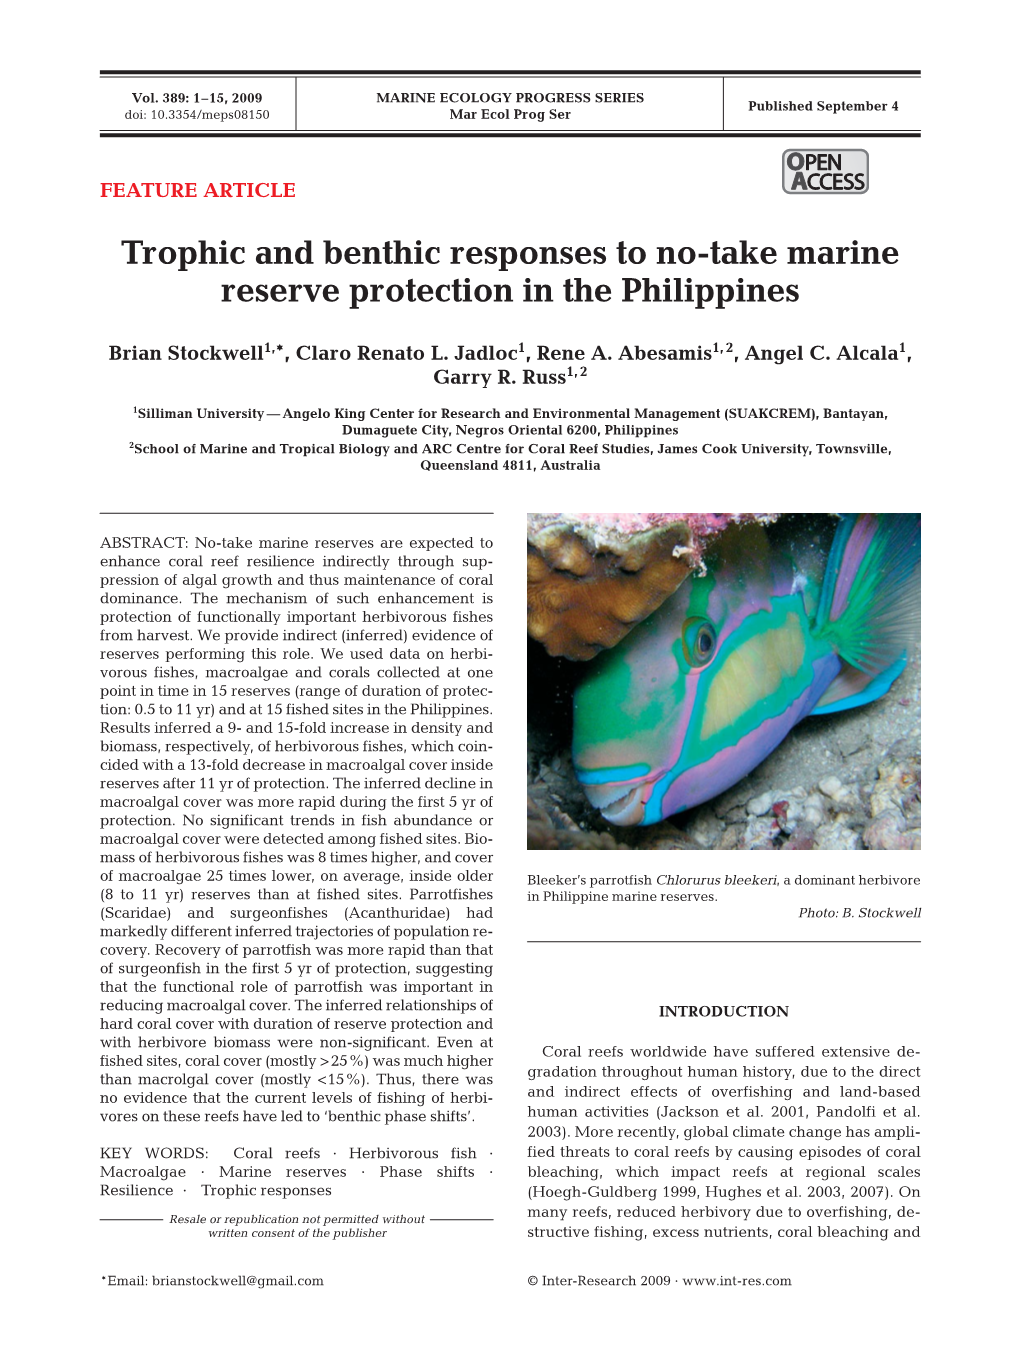 Trophic and Benthic Responses to No-Take Marine Reserve Protection in the Philippines